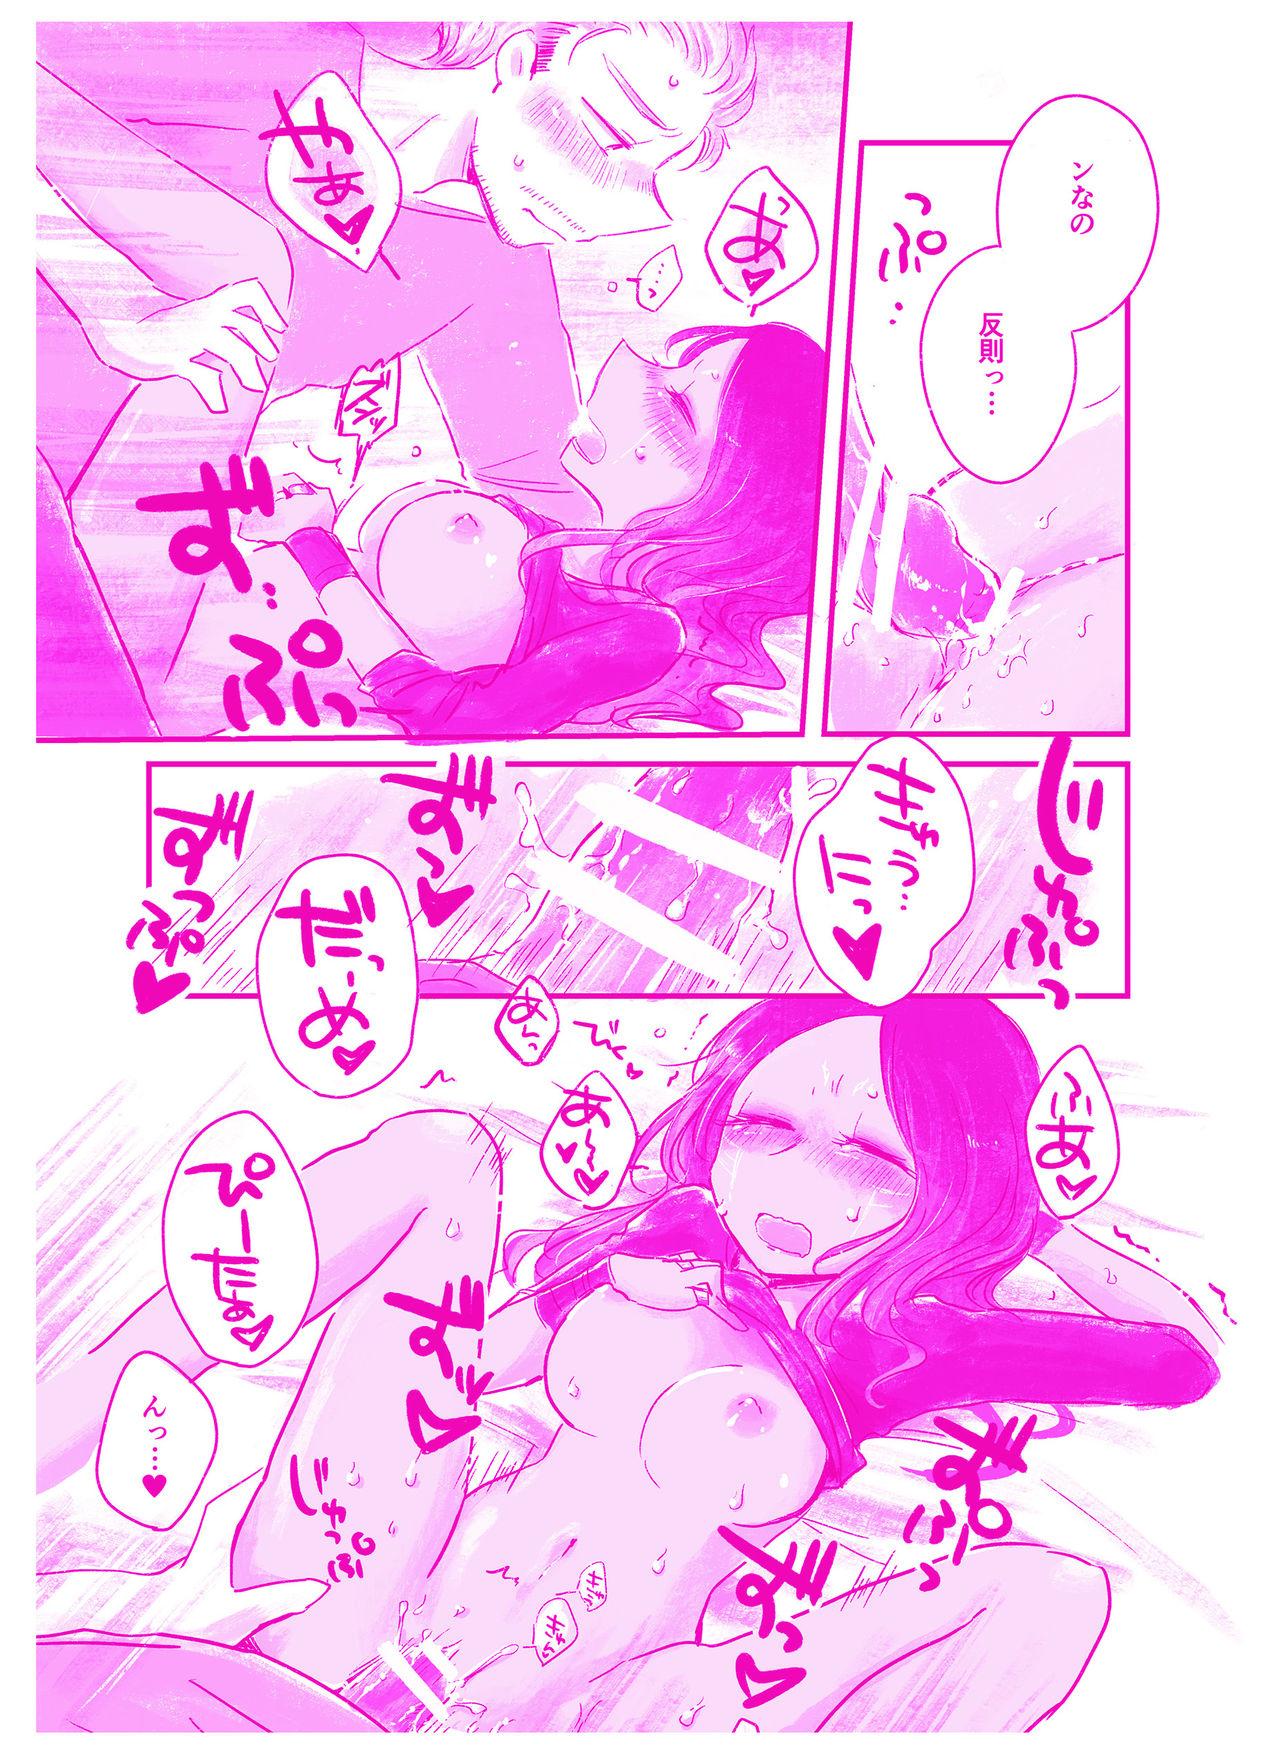 Anal Creampie 言われてみてえもんだ - Guardians of the galaxy Love - Page 12